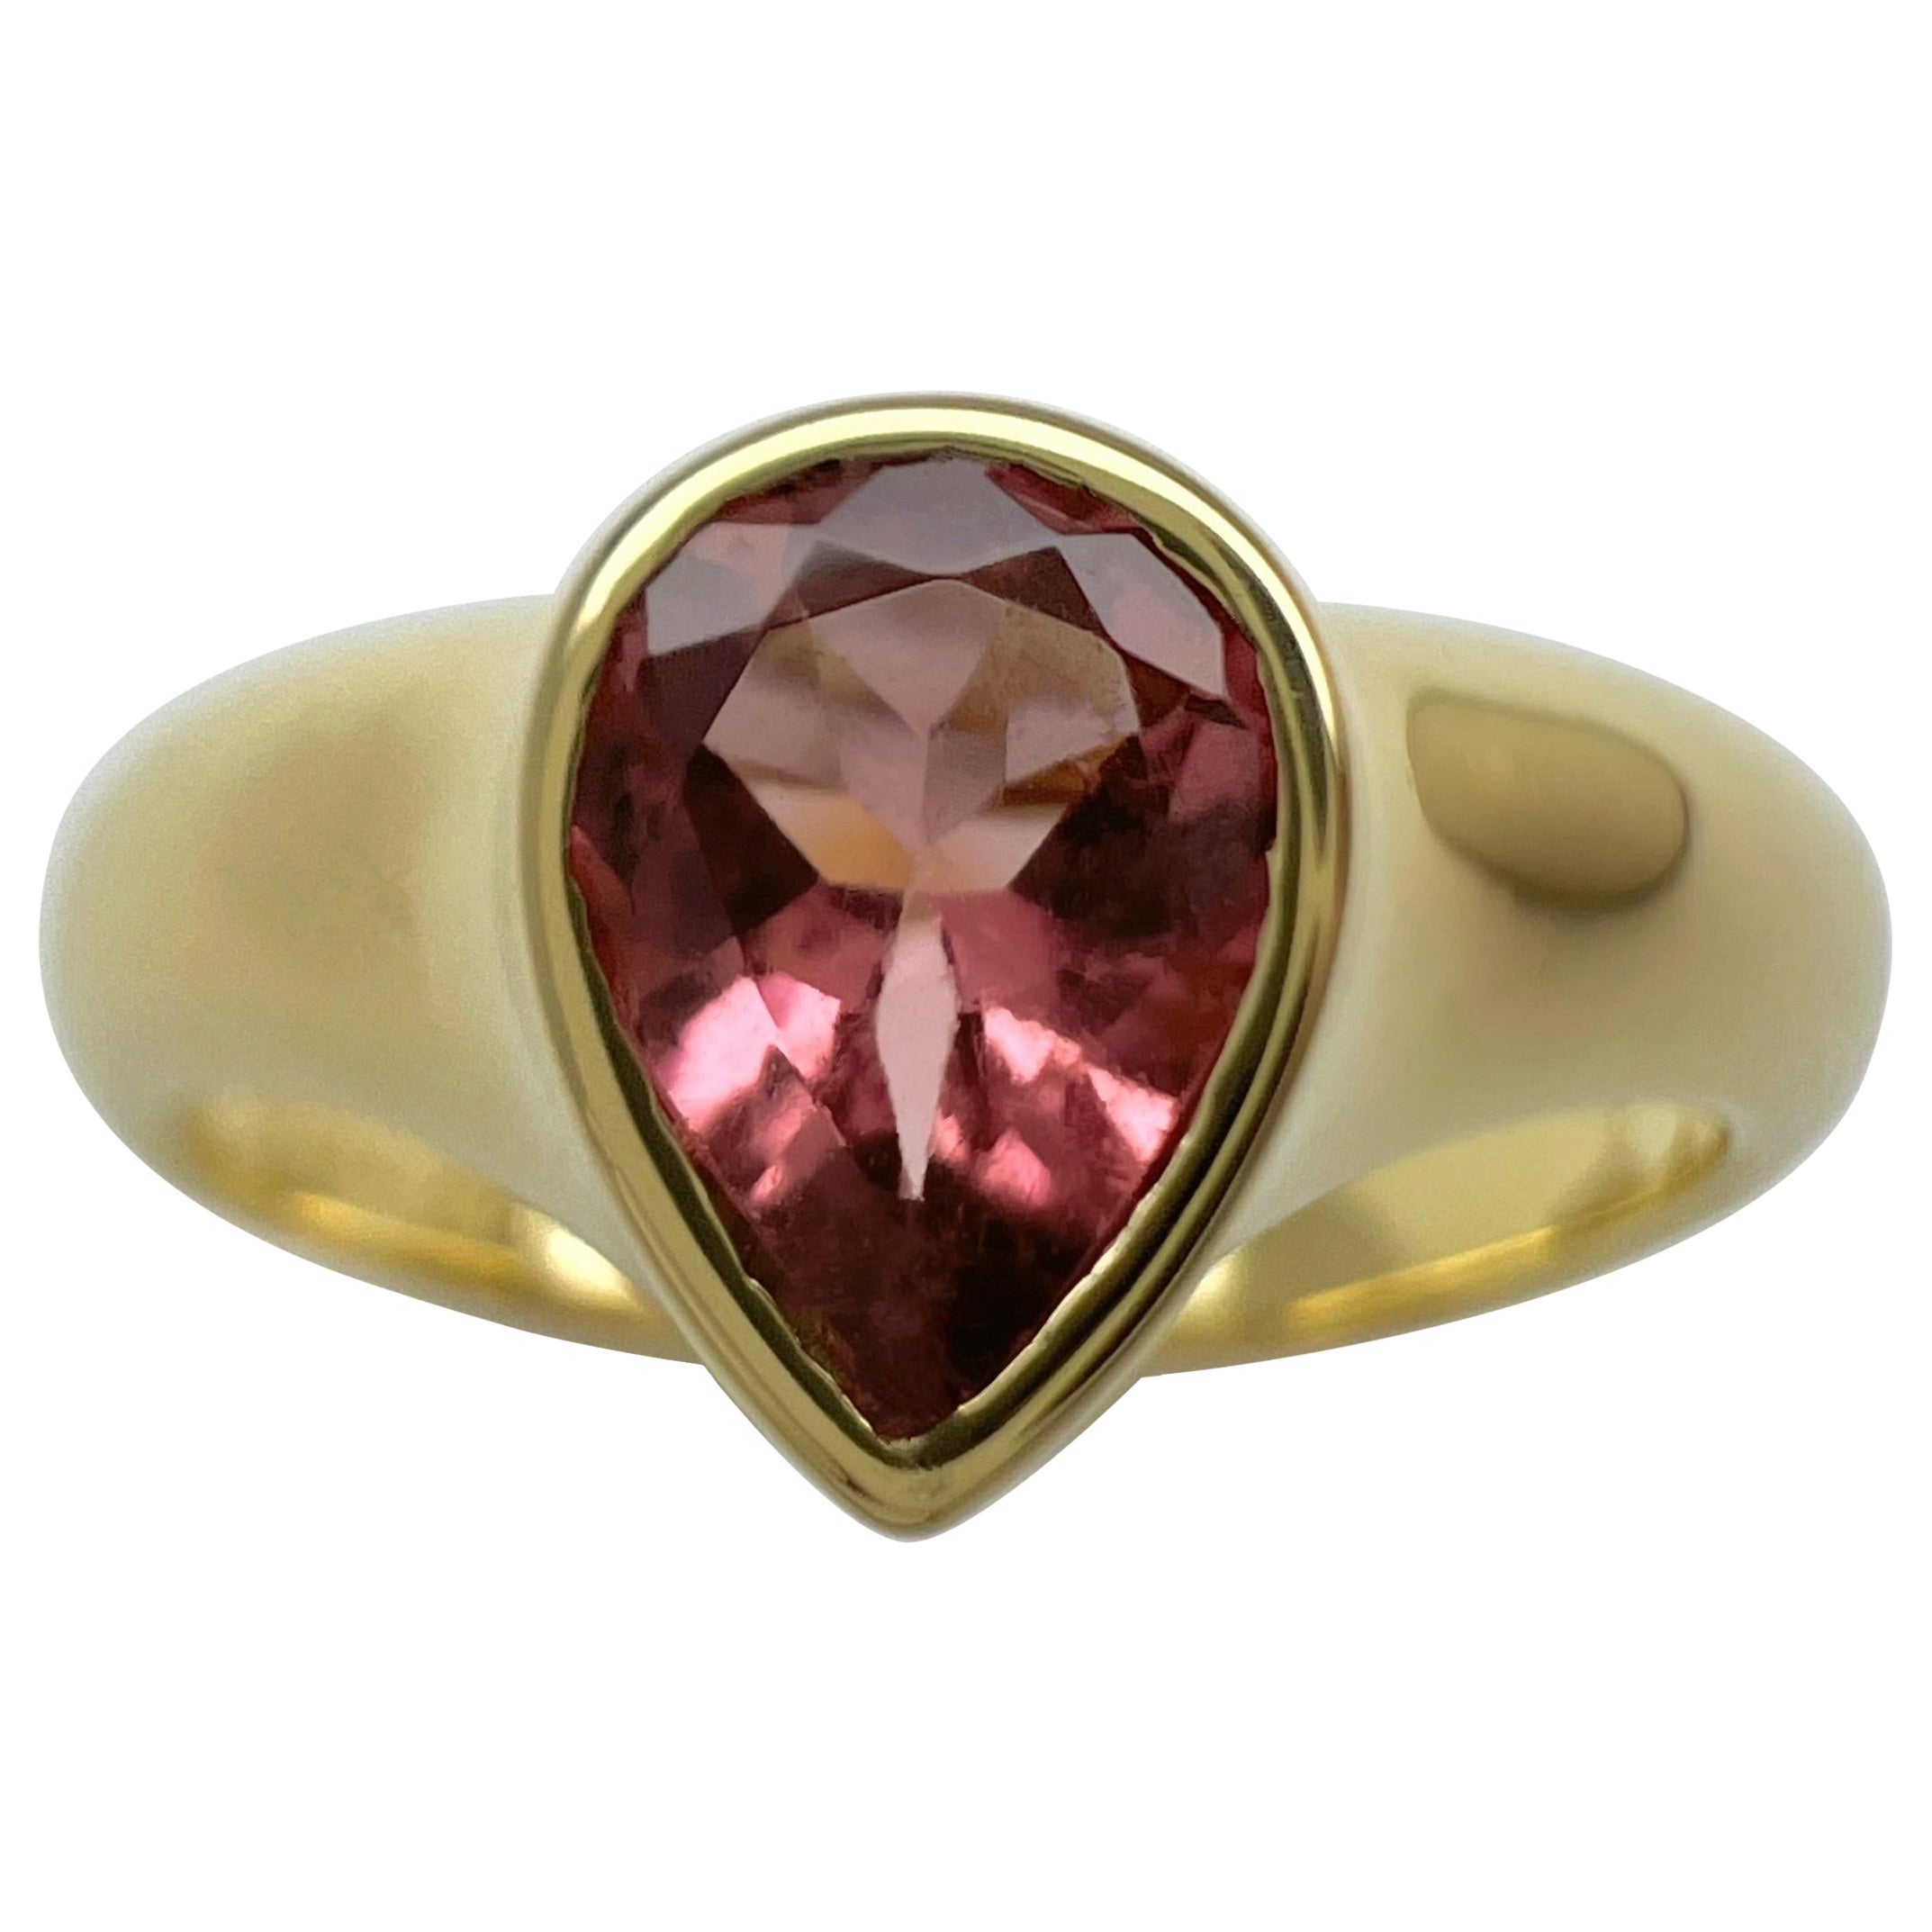 Rare Vintage Van Cleef & Arpels Pink Tourmaline Pear Cut 18k Yellow Gold Ring For Sale